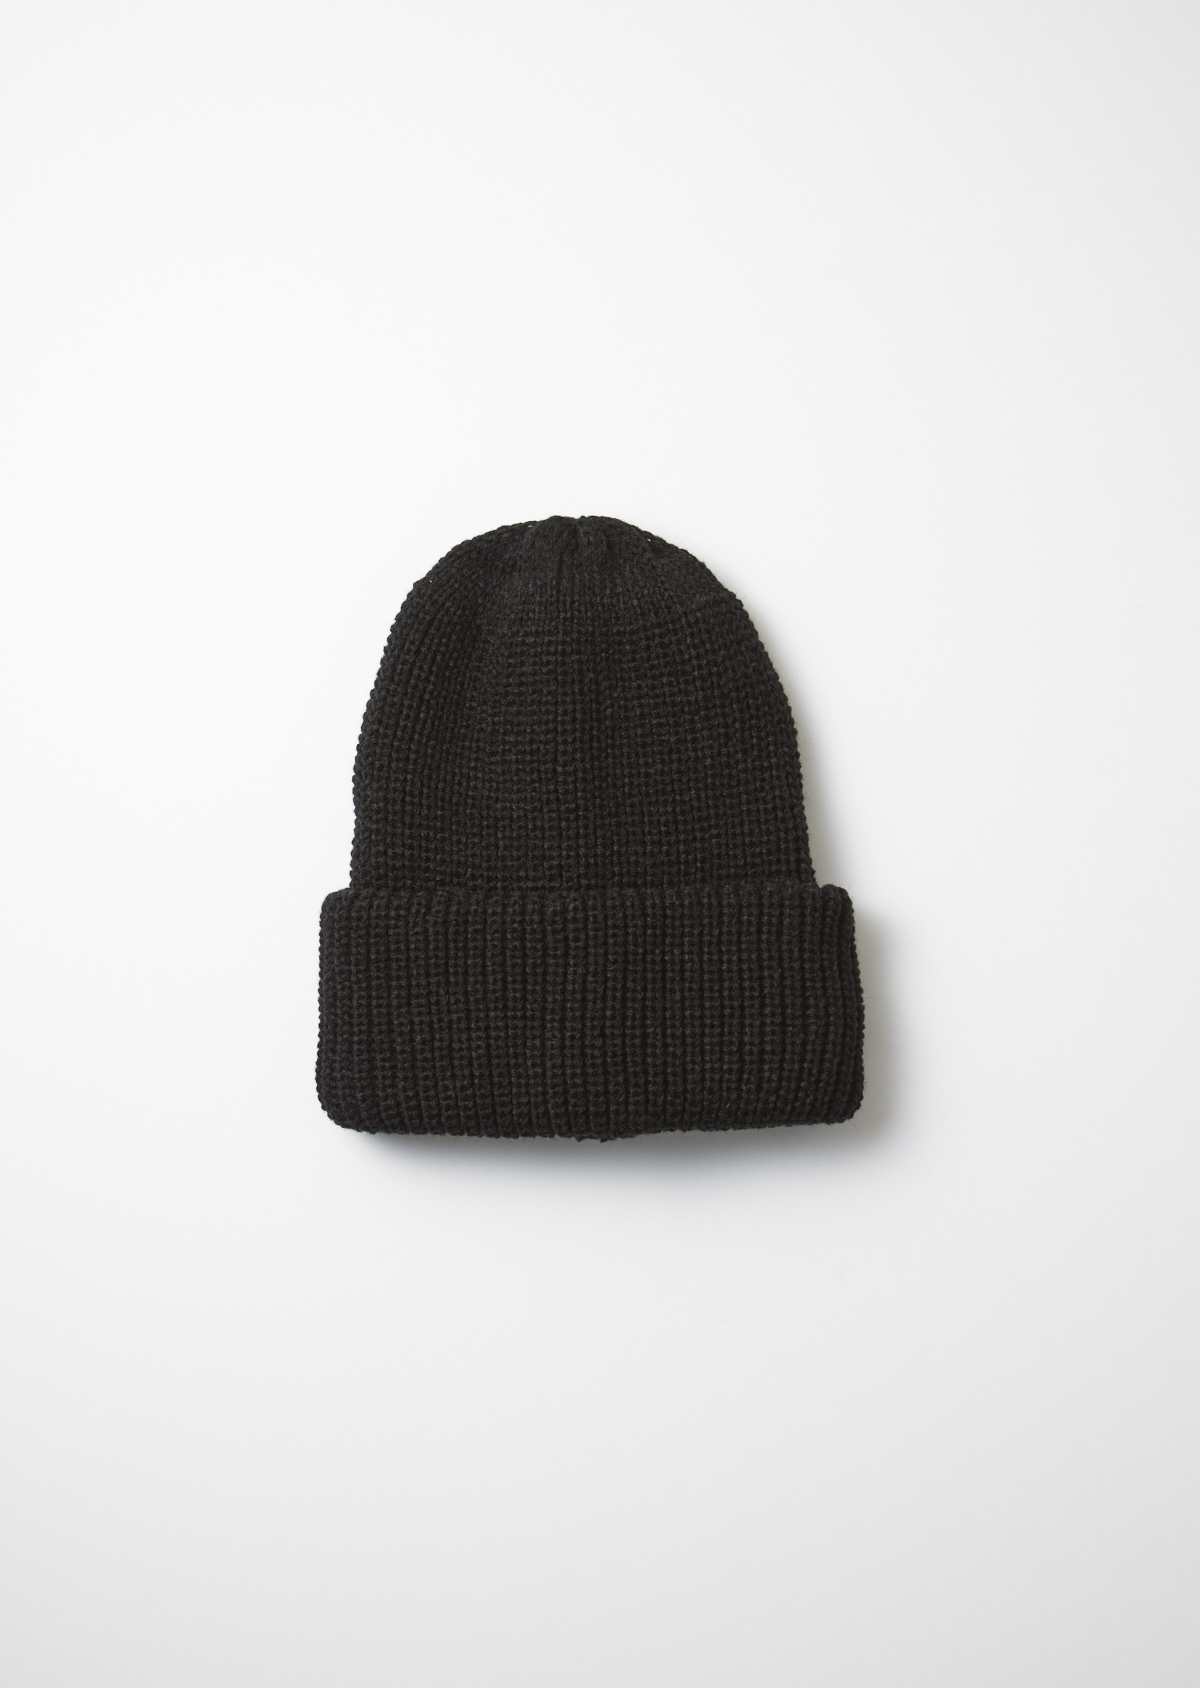 Picture of Rototo | Cozy Chunky Beanie